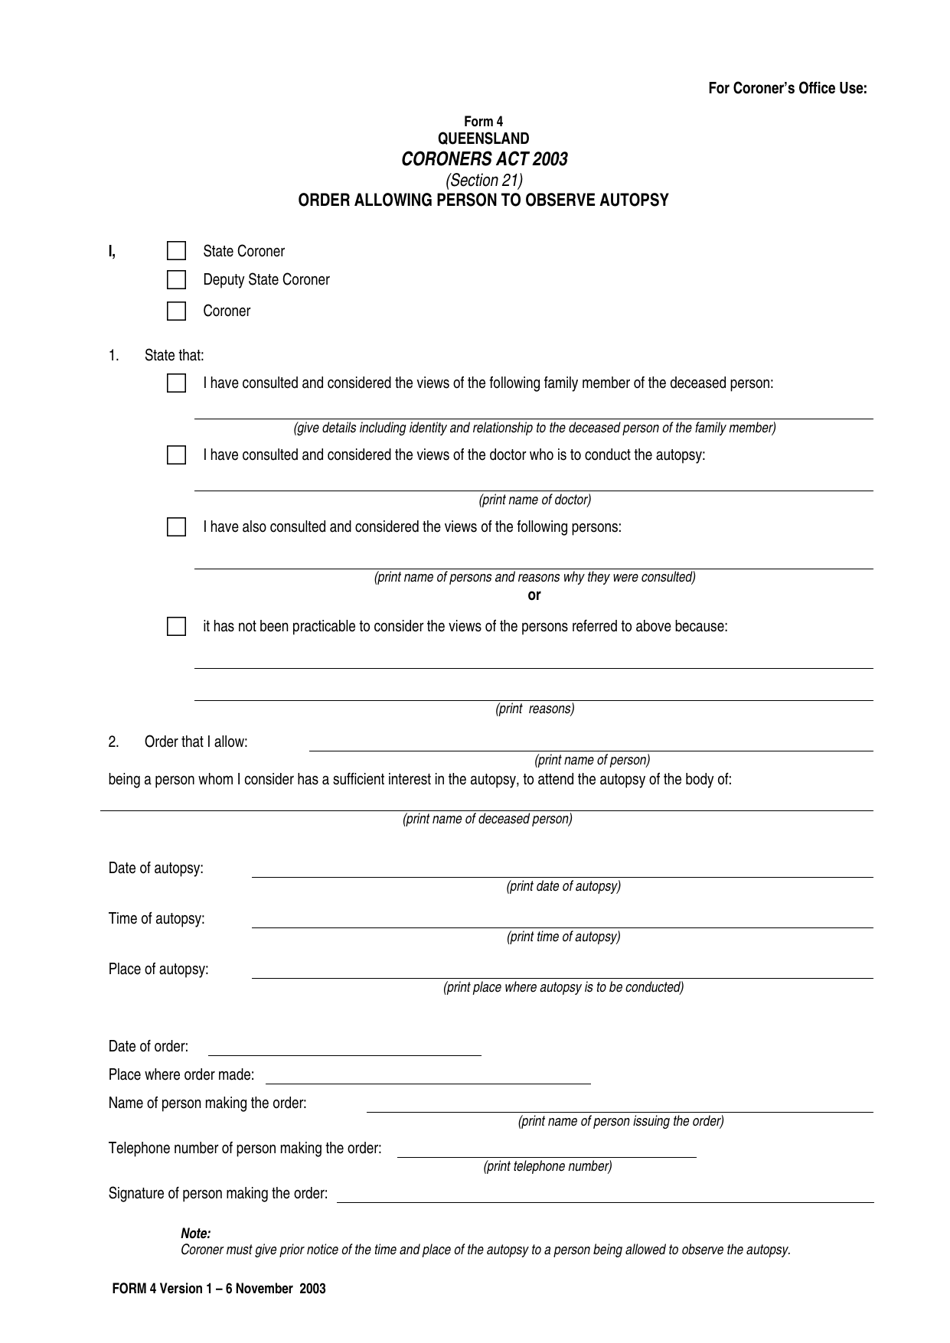 Form 4 Order Allowing Person to Observe Autopsy - Queensland, Australia, Page 1